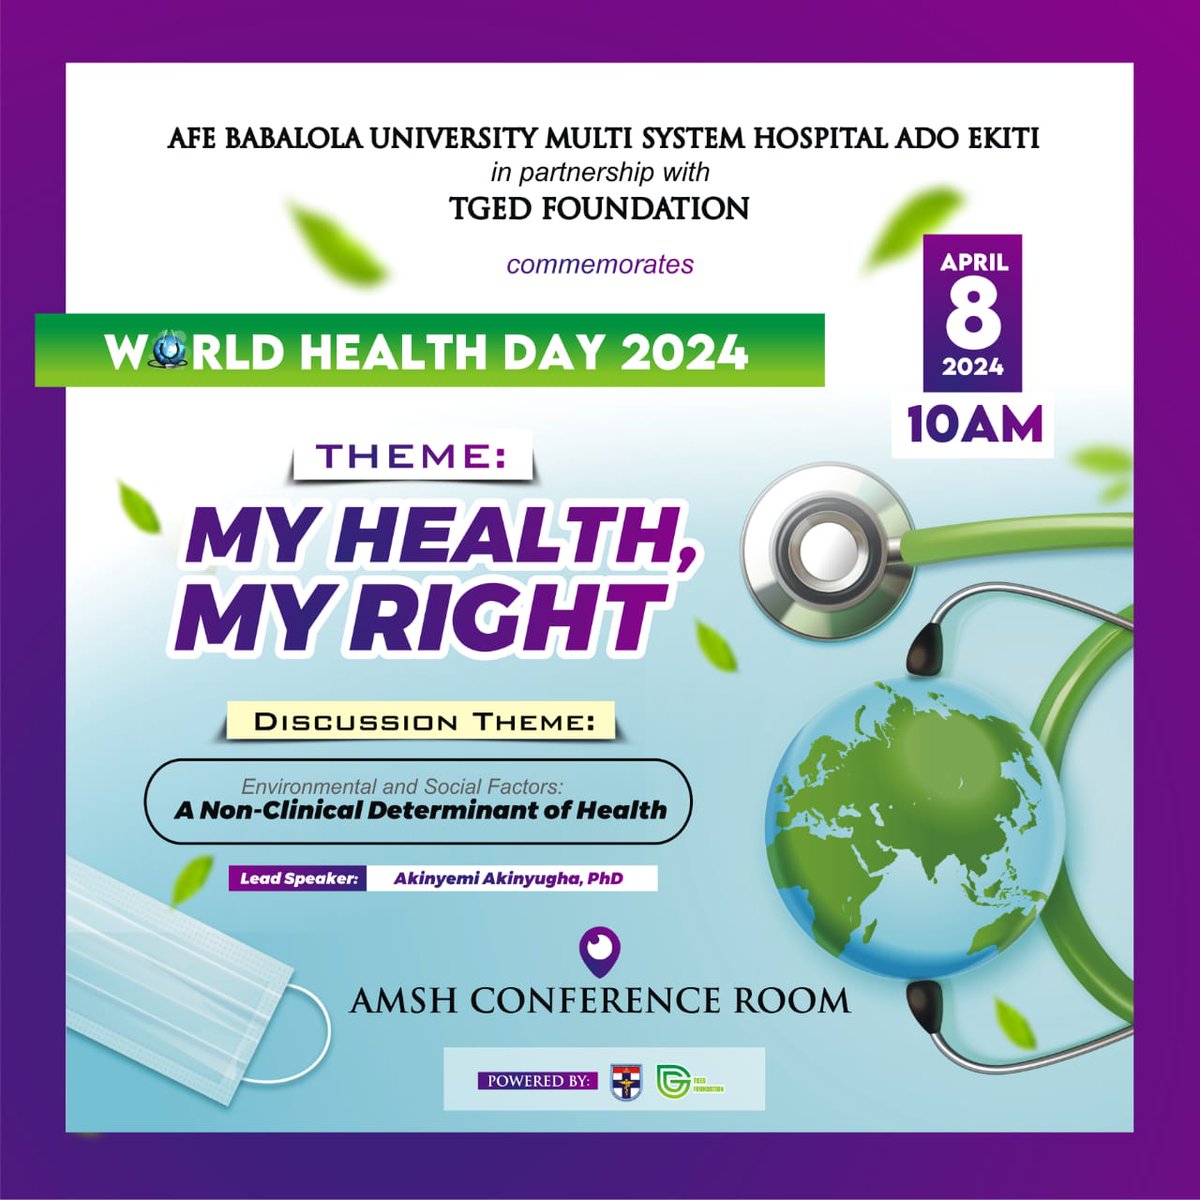 It's D-Day! As we commemorate #WorldHealthDay2024, we're excited to unveil our distinguished Lead Speaker and discussants for the event, in collaboration with @ABUADMSH Lead Speaker: @YAkinyugha (Technical Adviser to @biodunaoyebanji on Green Economy and Ecological Matters)